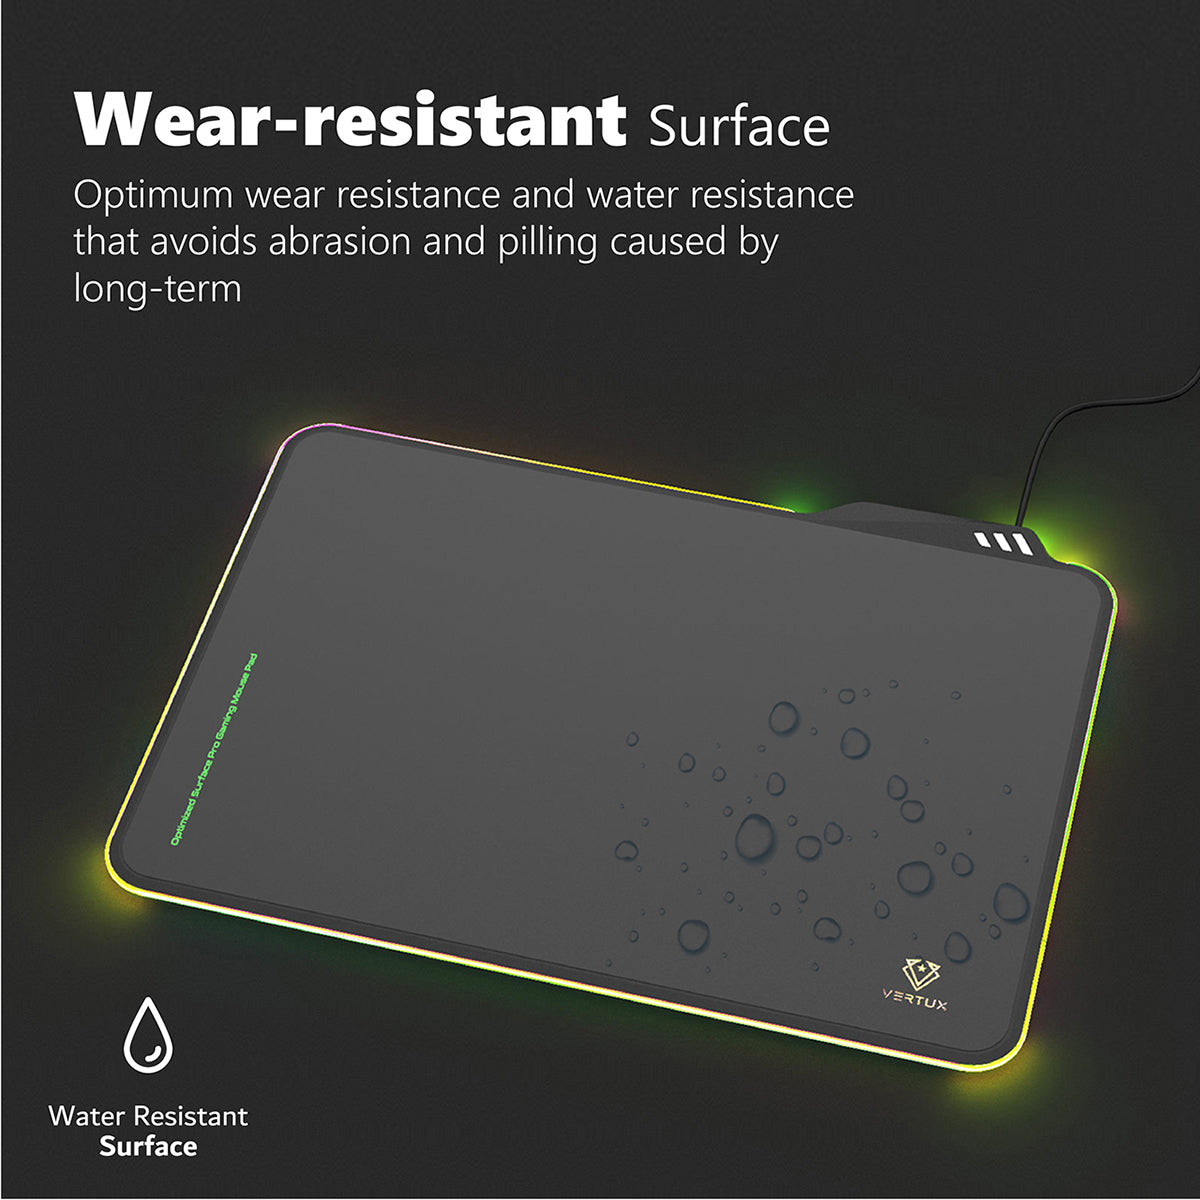 Optimized Surface Pro-Gaming Mouse Pad